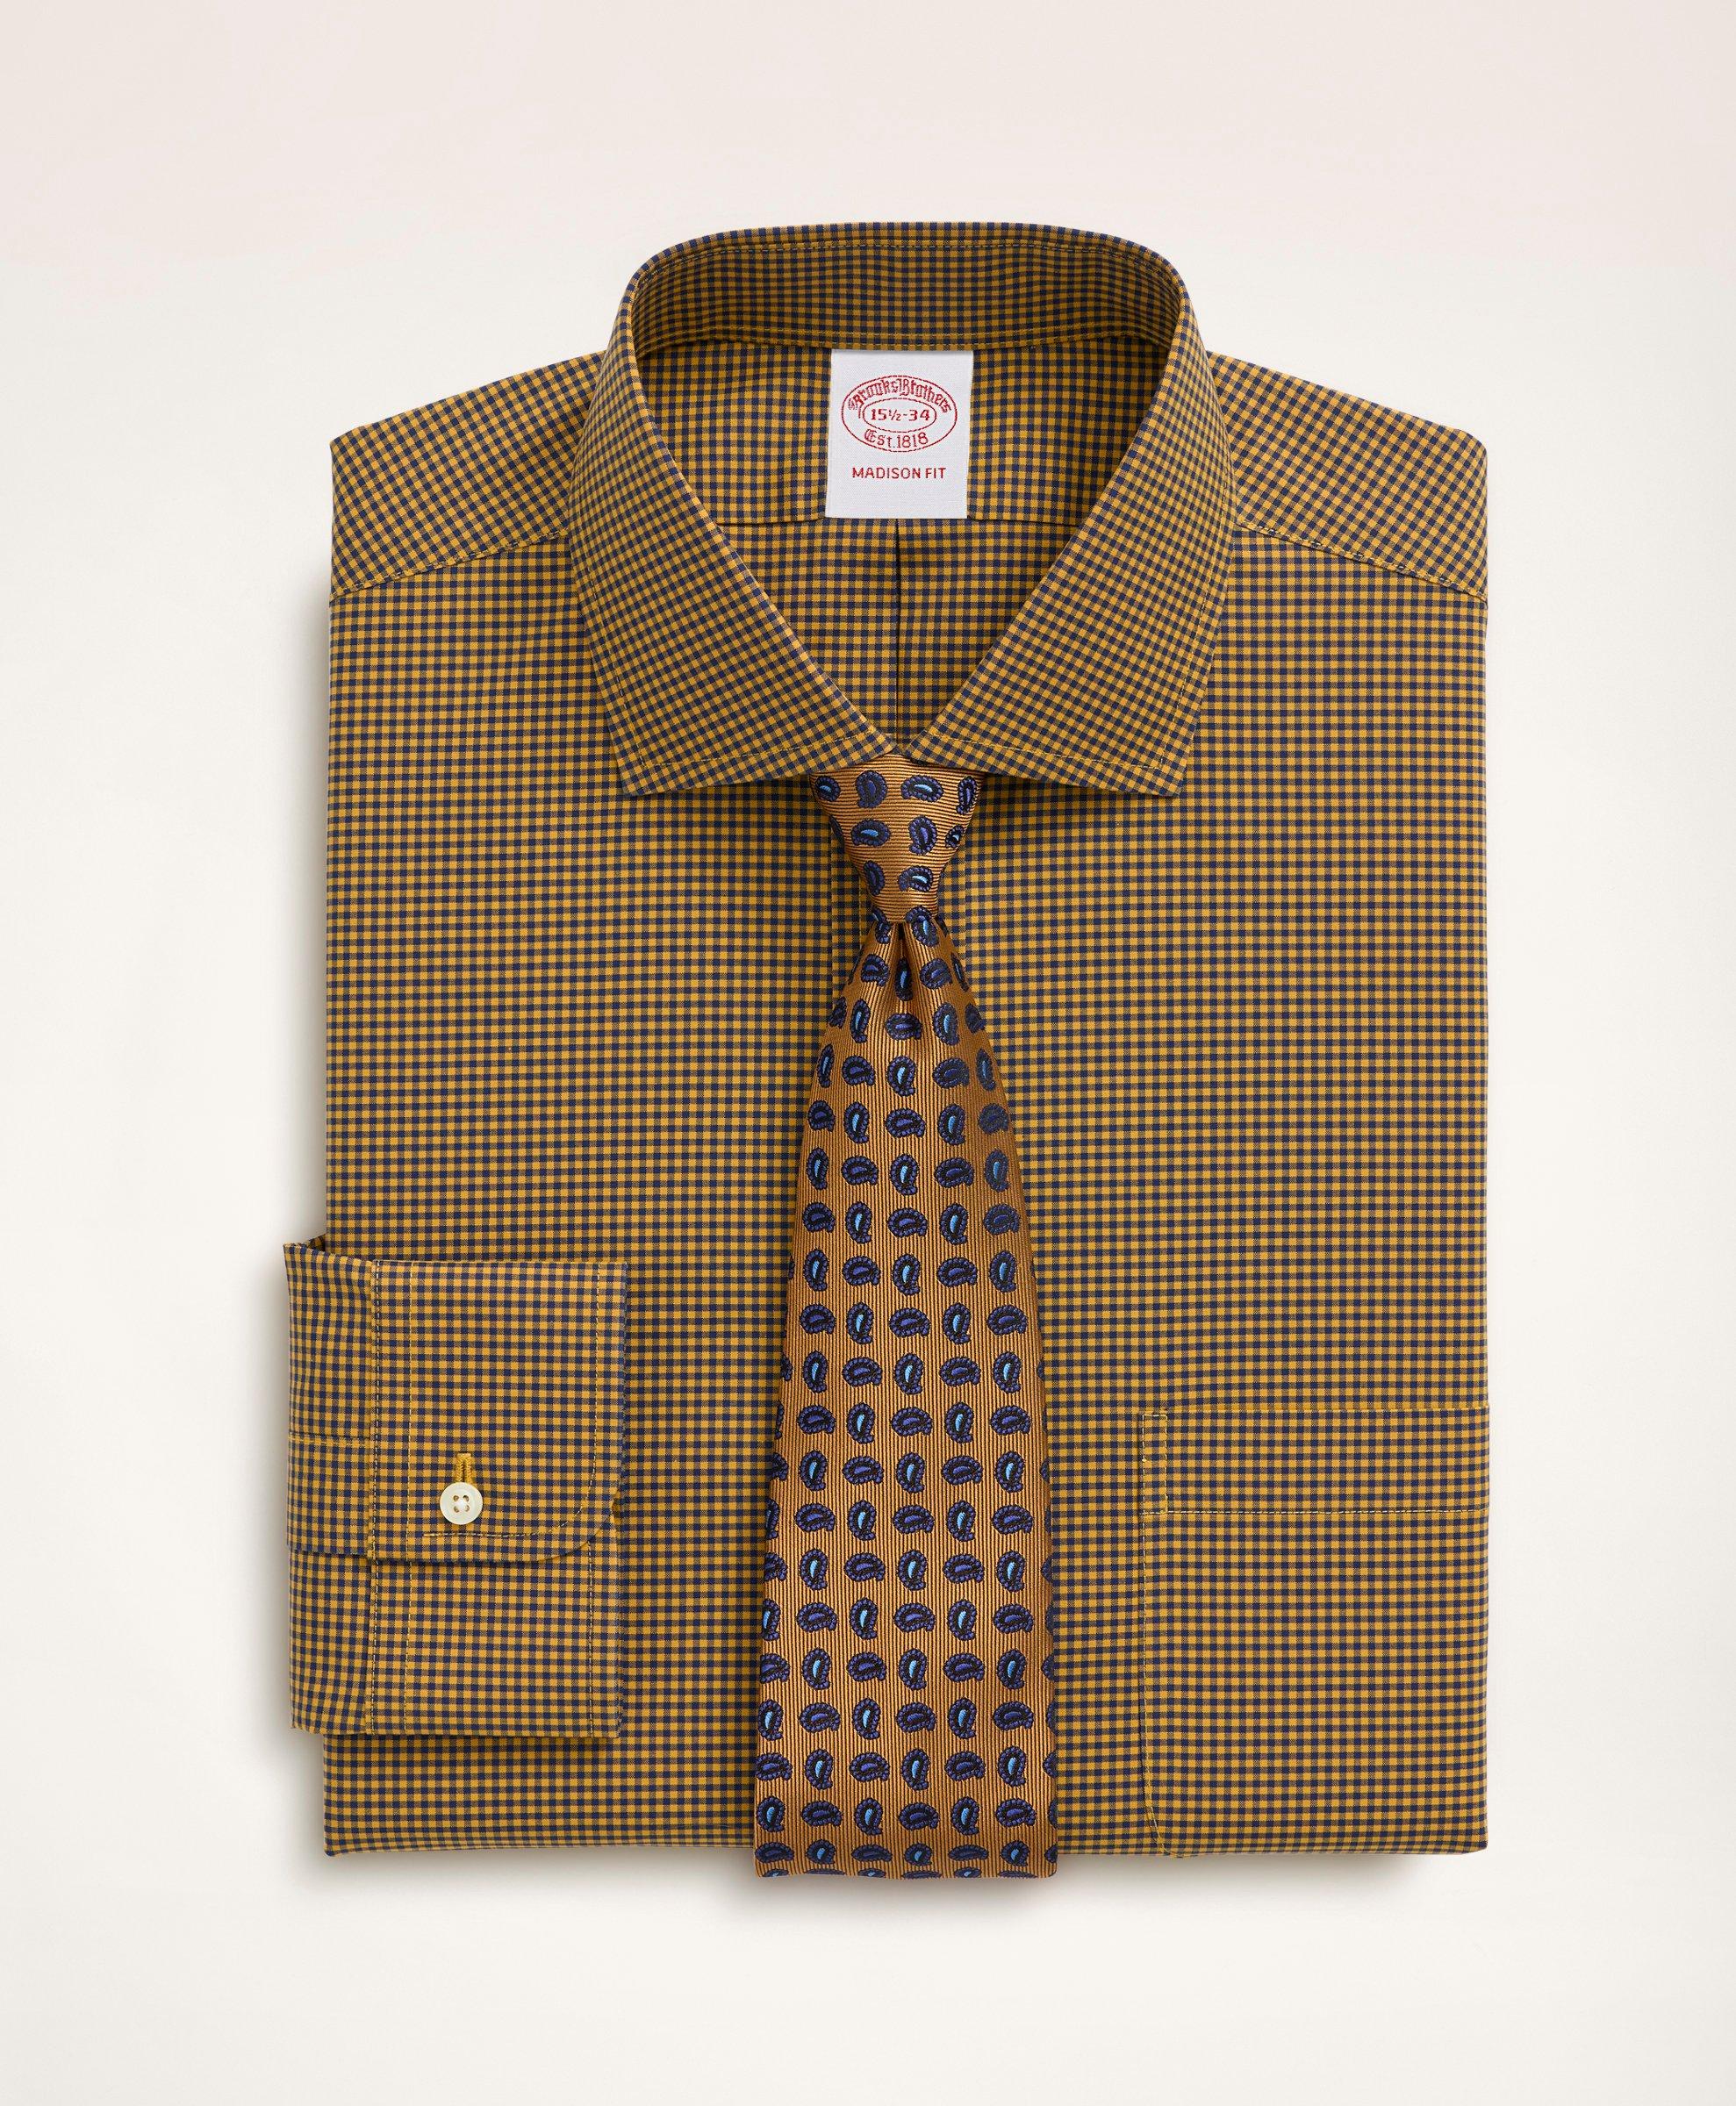 Brooks Brothers Stretch Madison Relaxed-fit Dress Shirt, Non-iron Poplin English Spread Collar Gingham | Dark Yellow